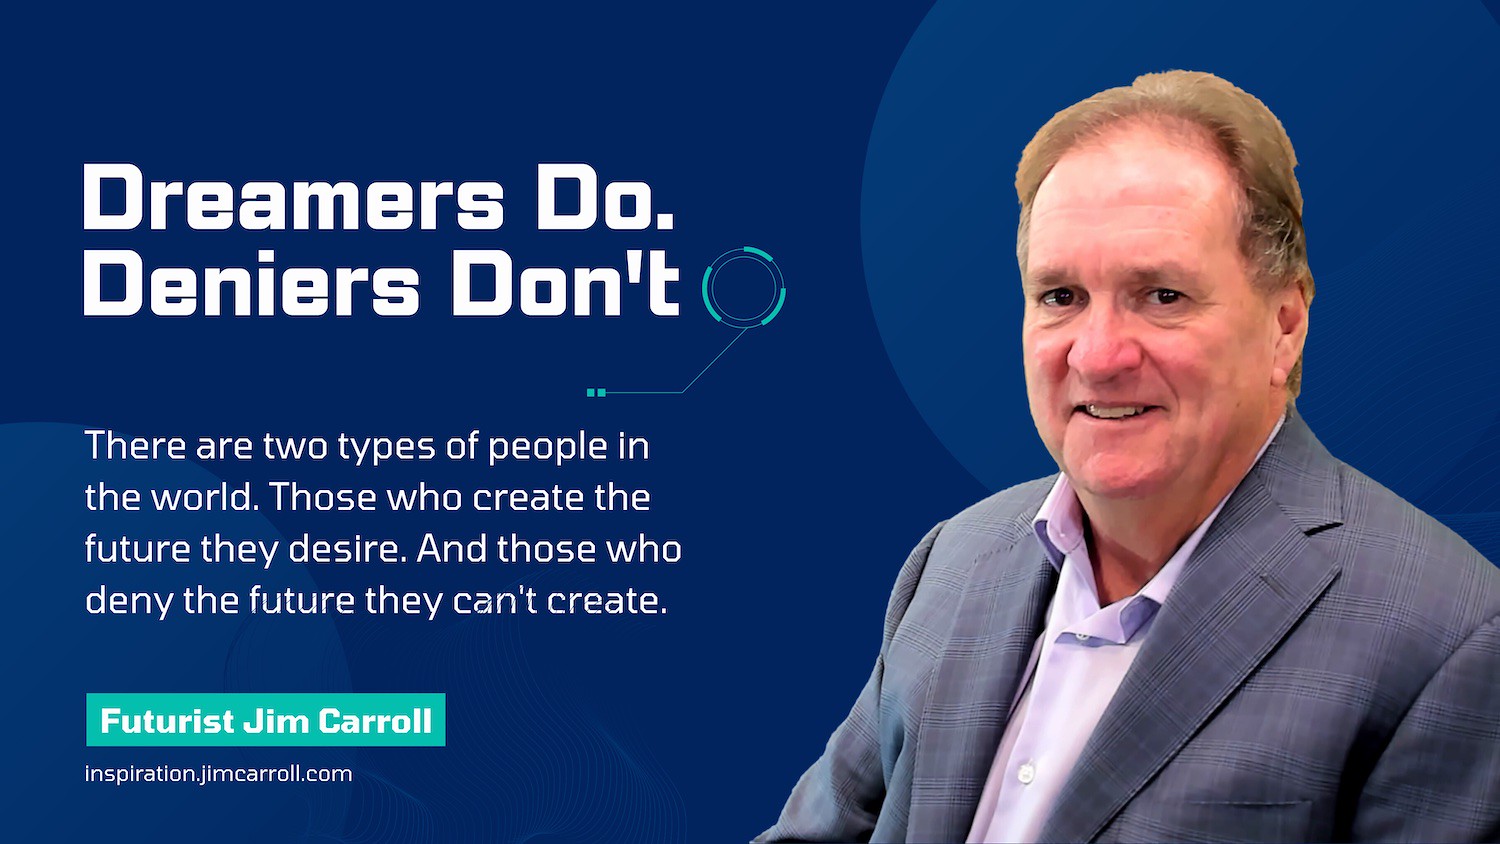 "There are two types of people in the world. Those who create the future they desire. And those who deny the future they can't create!" - Futurist Jim Carroll